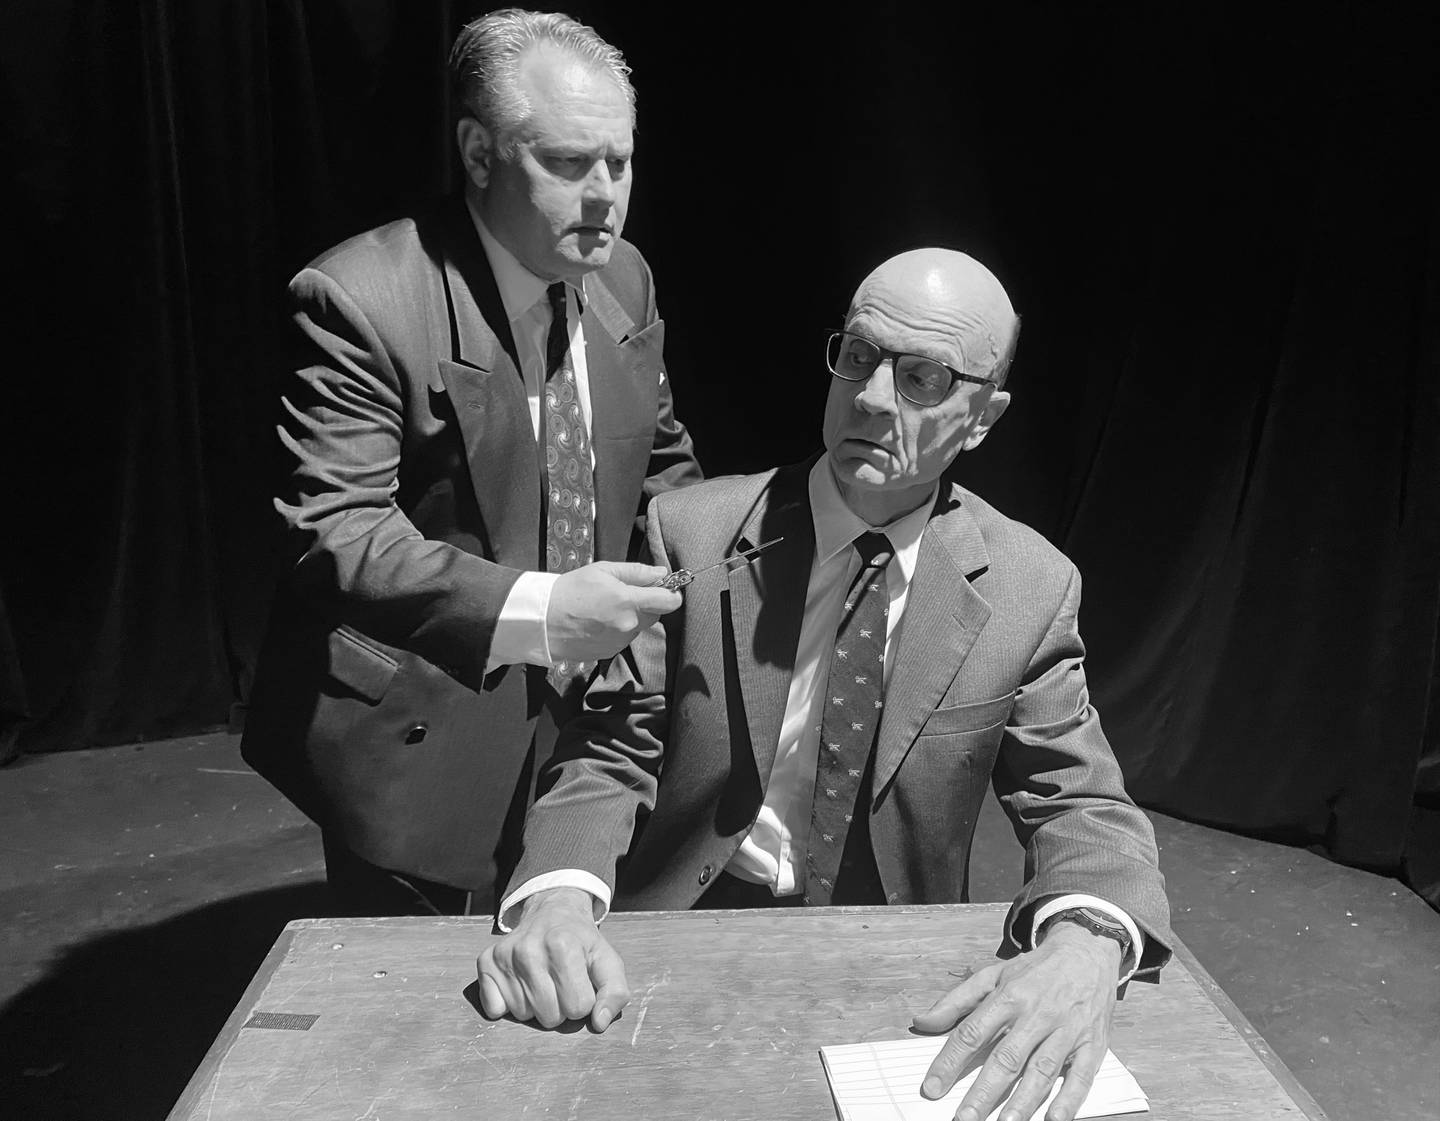 DOA at Steel Beam Theatre: Dean Gallagher (l) as Frank Bigelow with knife and Mike Speller as Halliday.